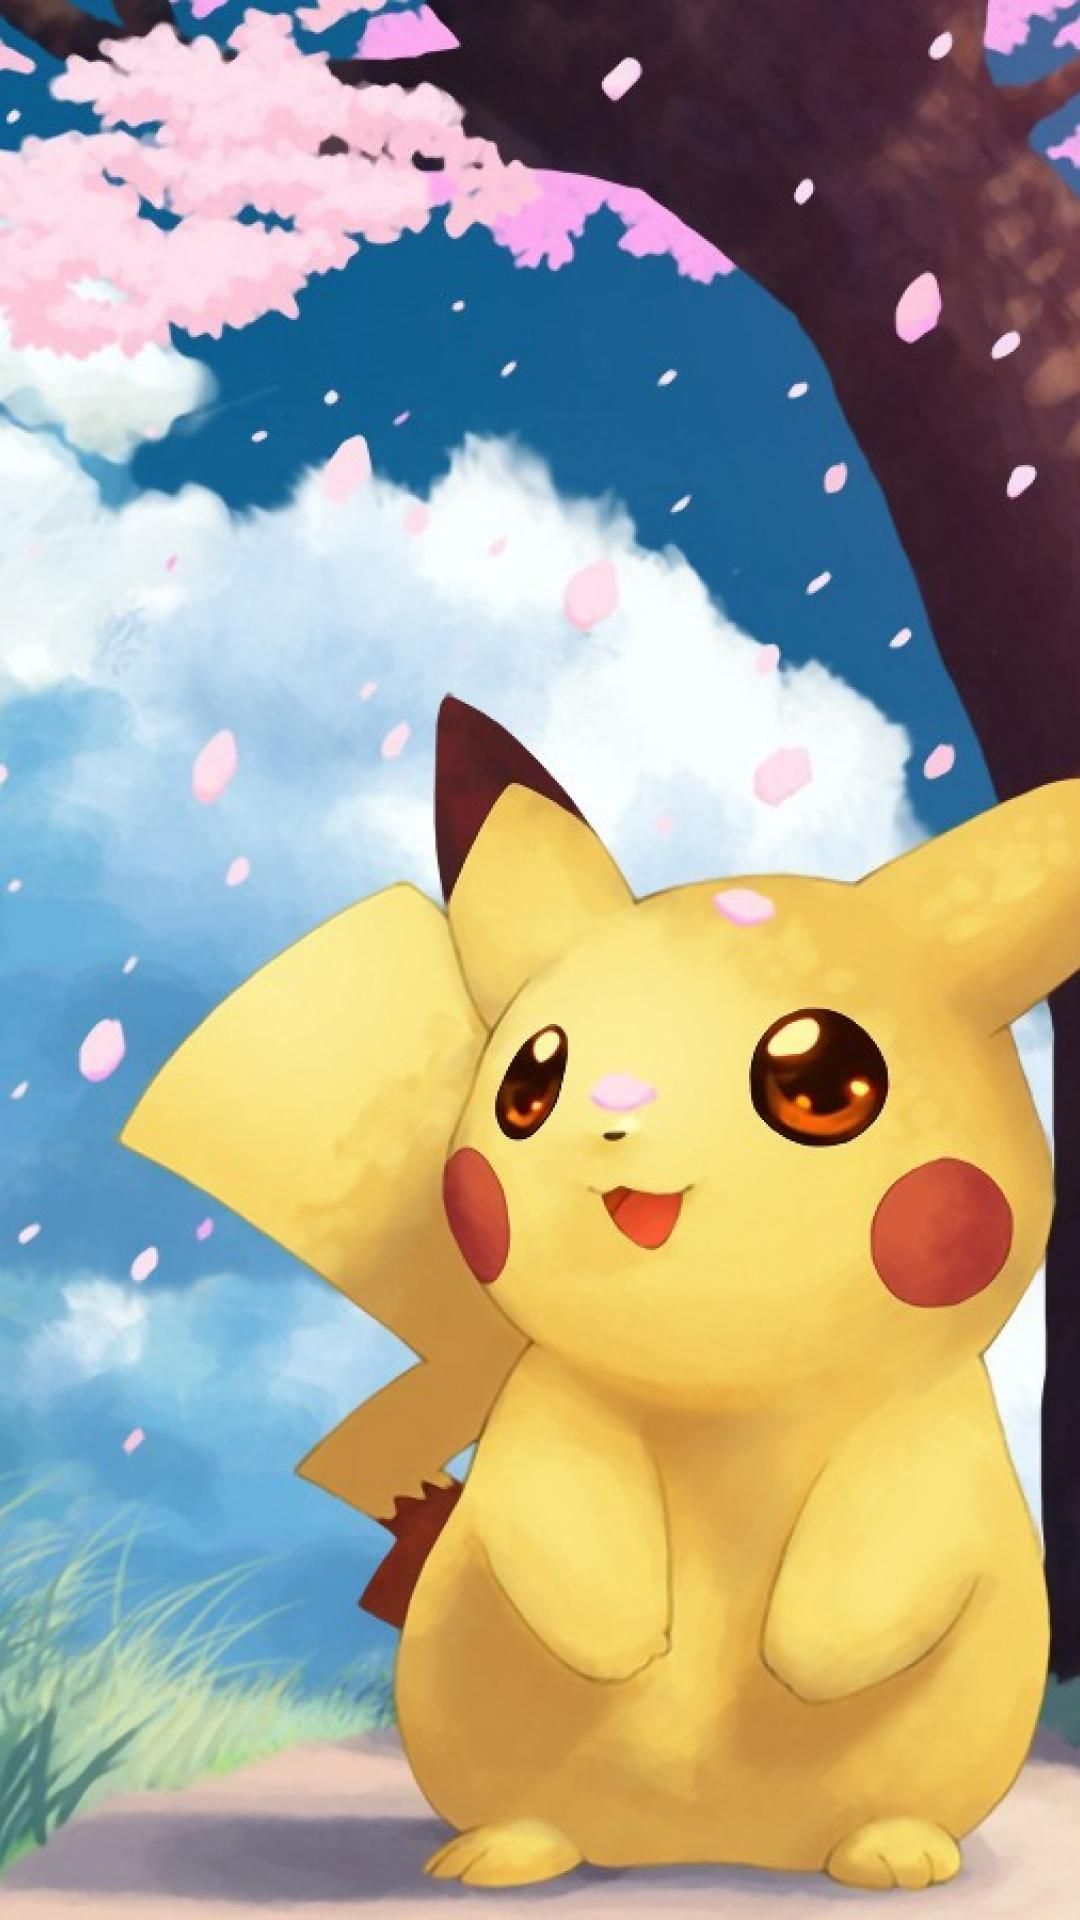 Free download 68 Cool Pokemon iPhone Wallpapers [1080x1920] for ...